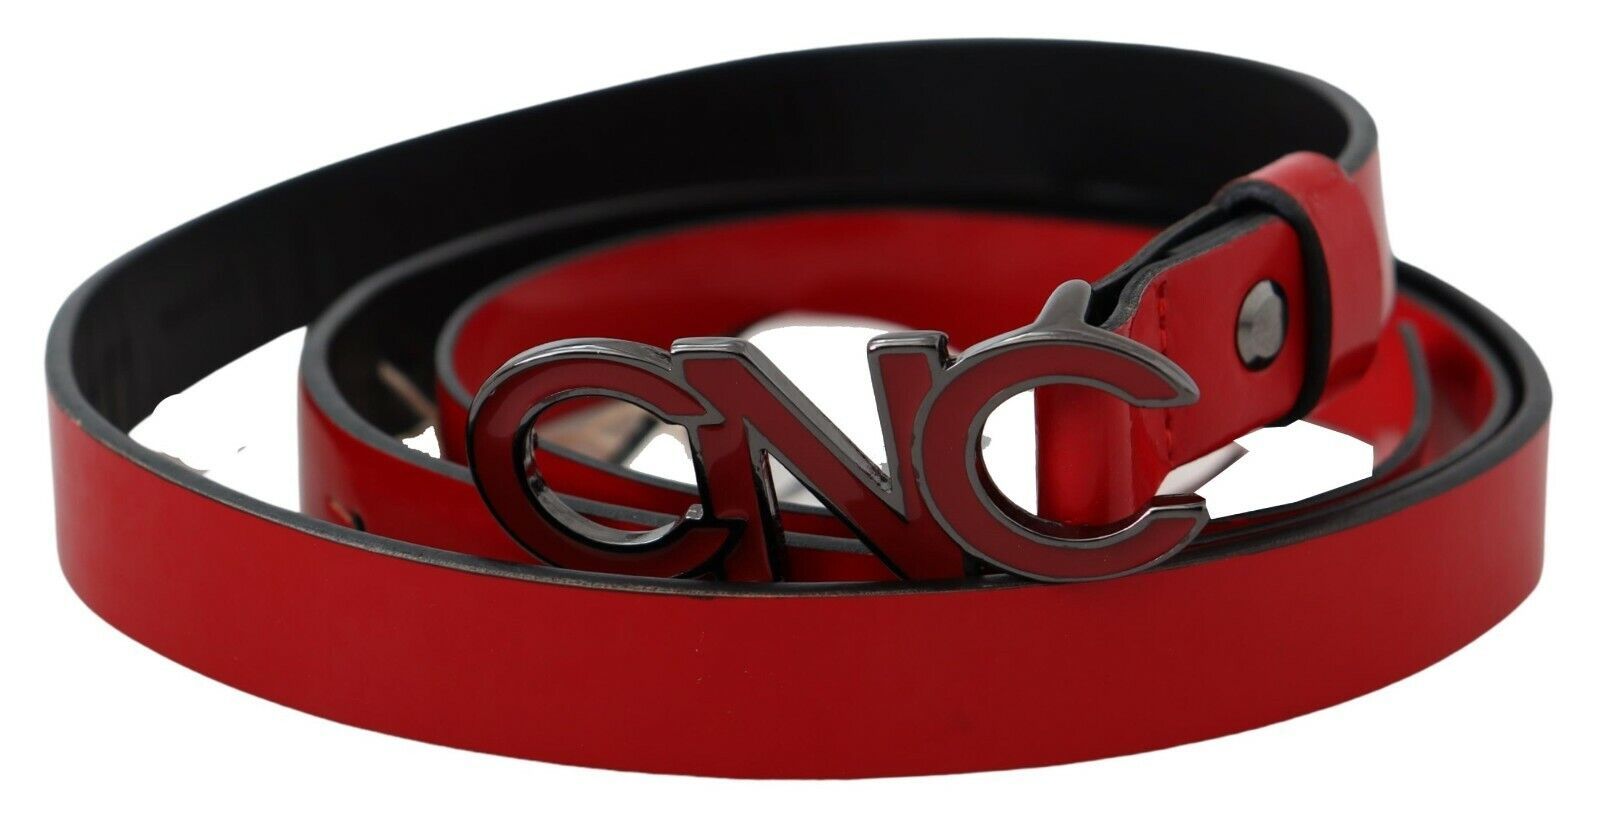 Costume National Chic Red Leather Waist Belt with Black-Tone Buckle